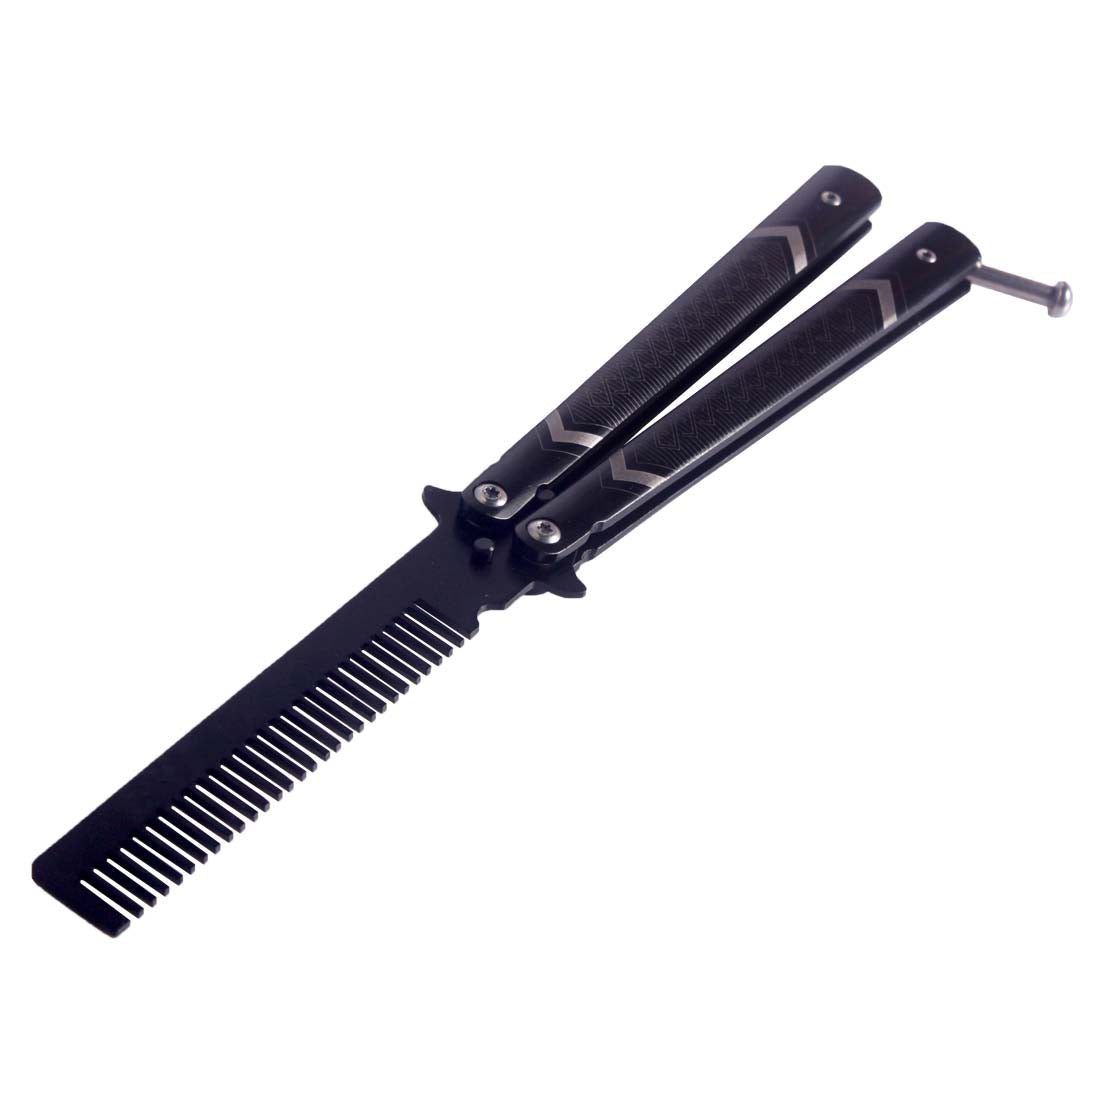 Andux Balisong Practice Tool Comb Style Black CS/HDD07